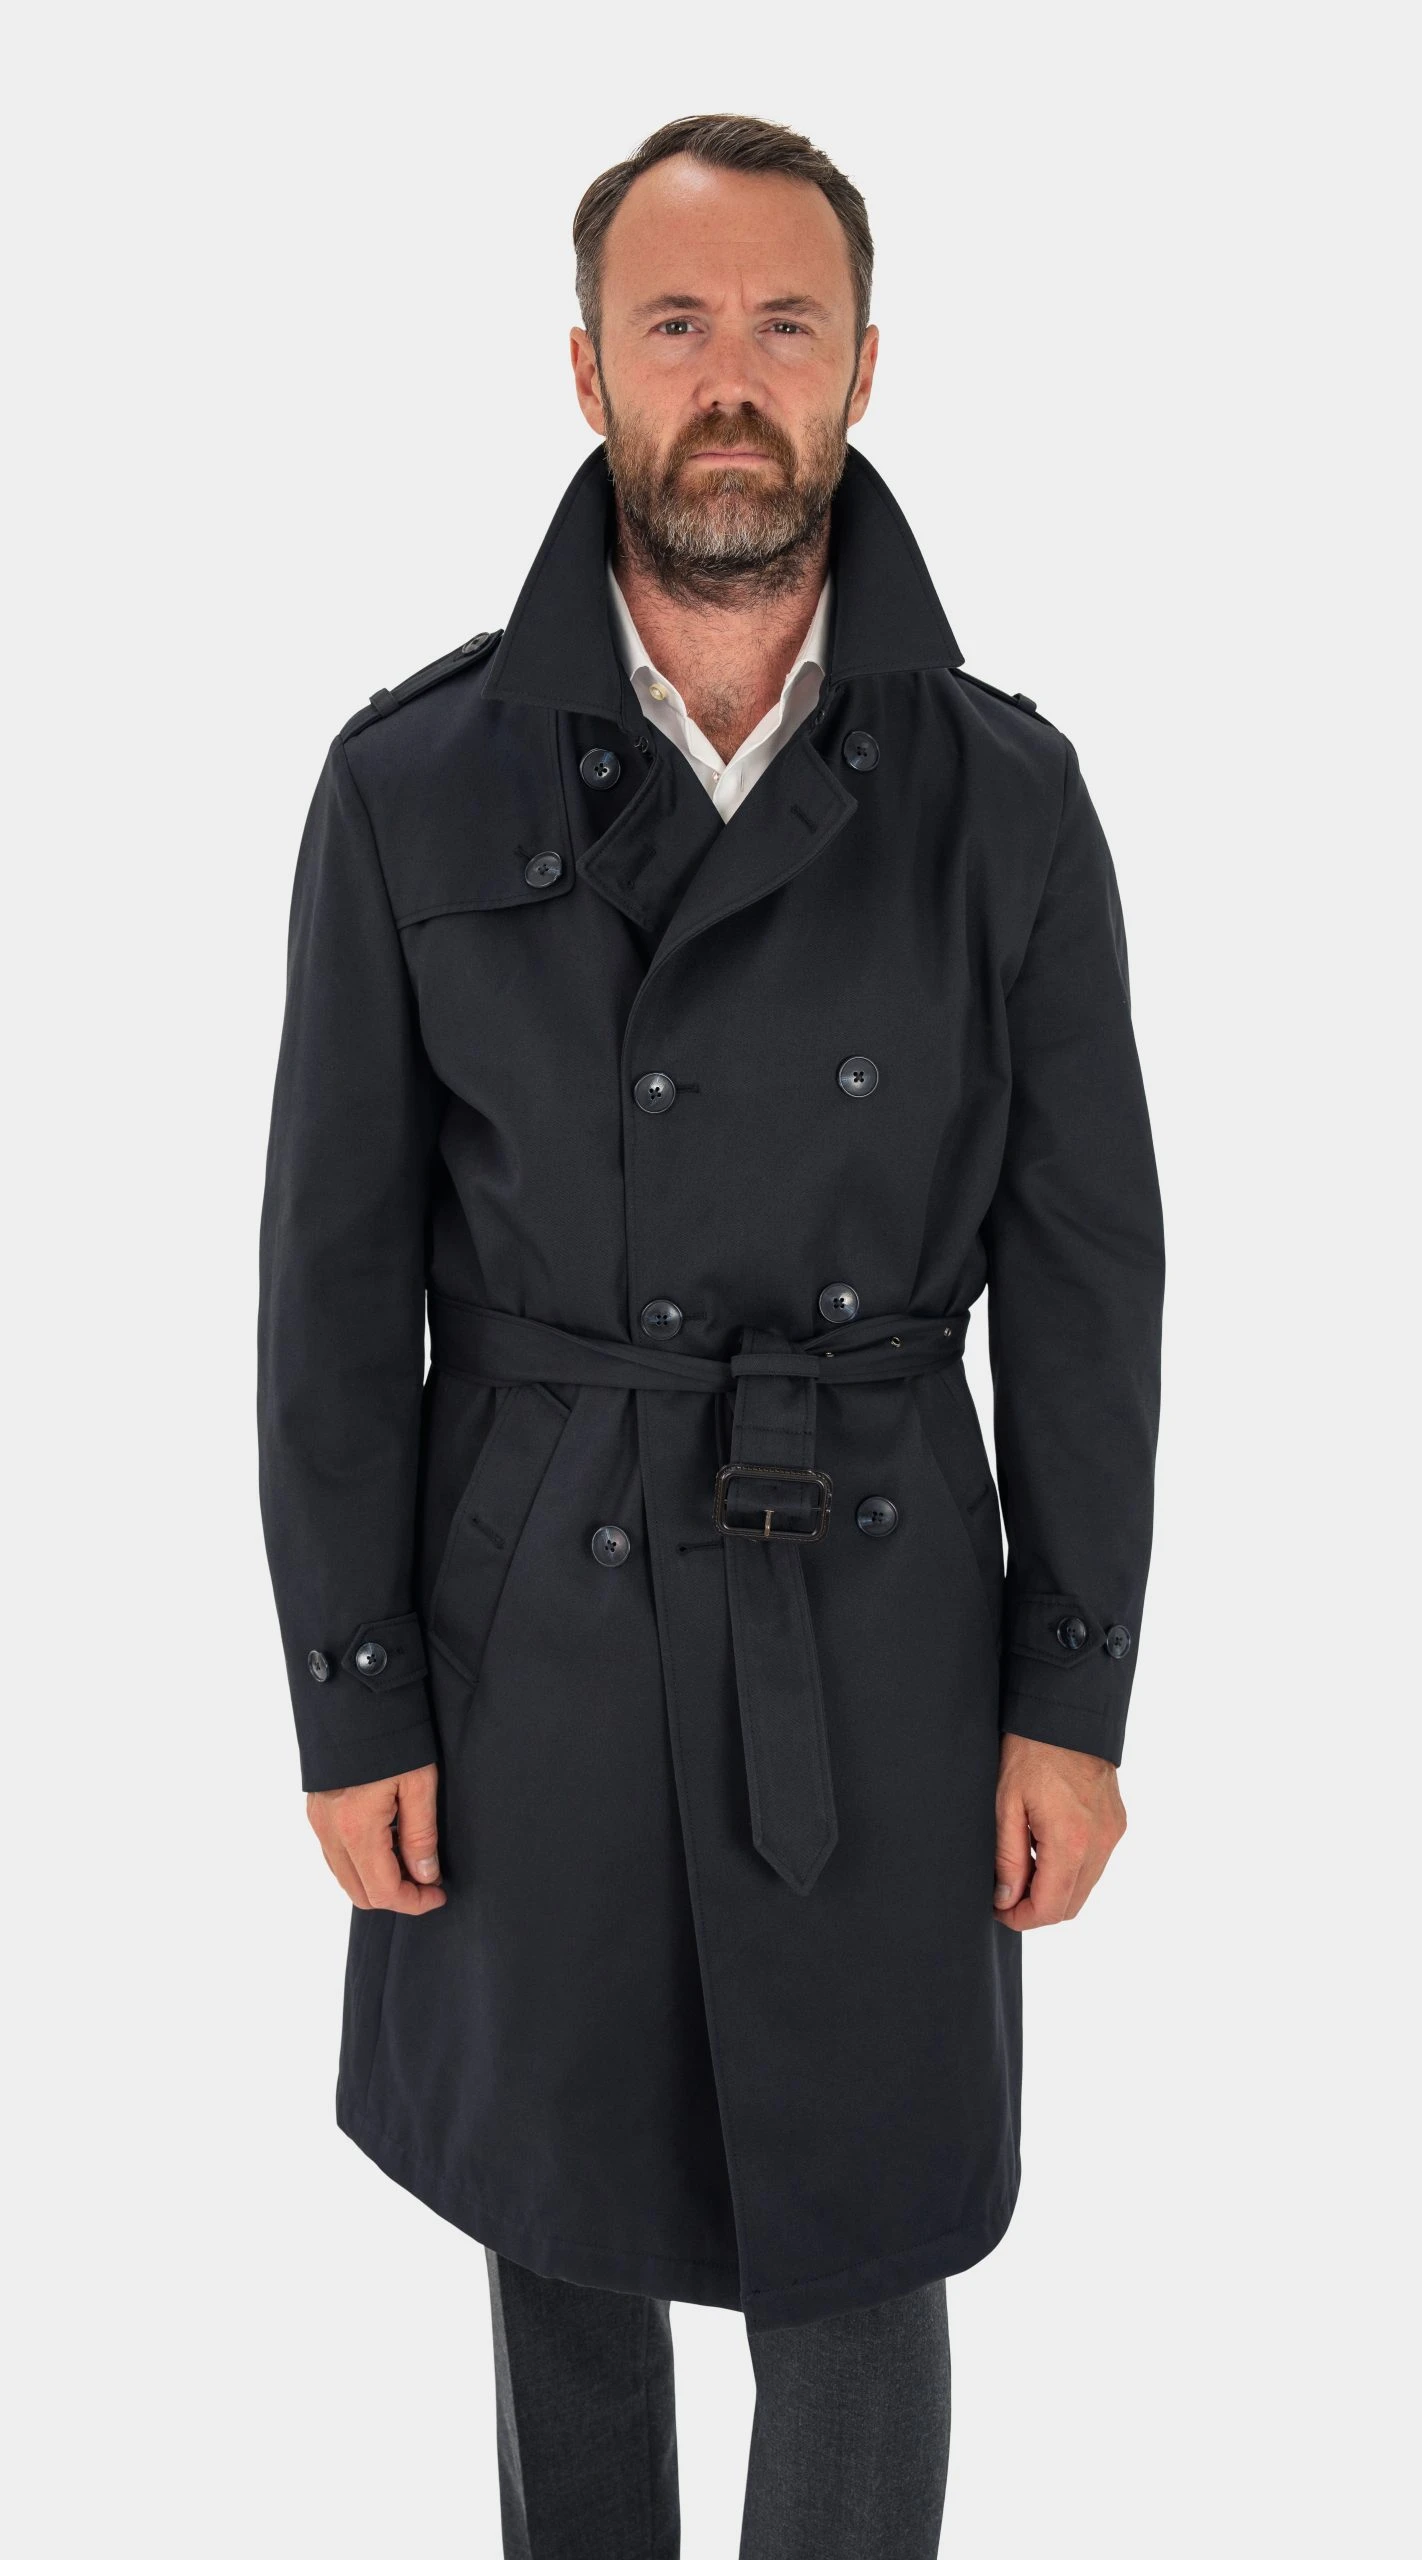 navy blue twill rain repellent trench coat custom made by mond